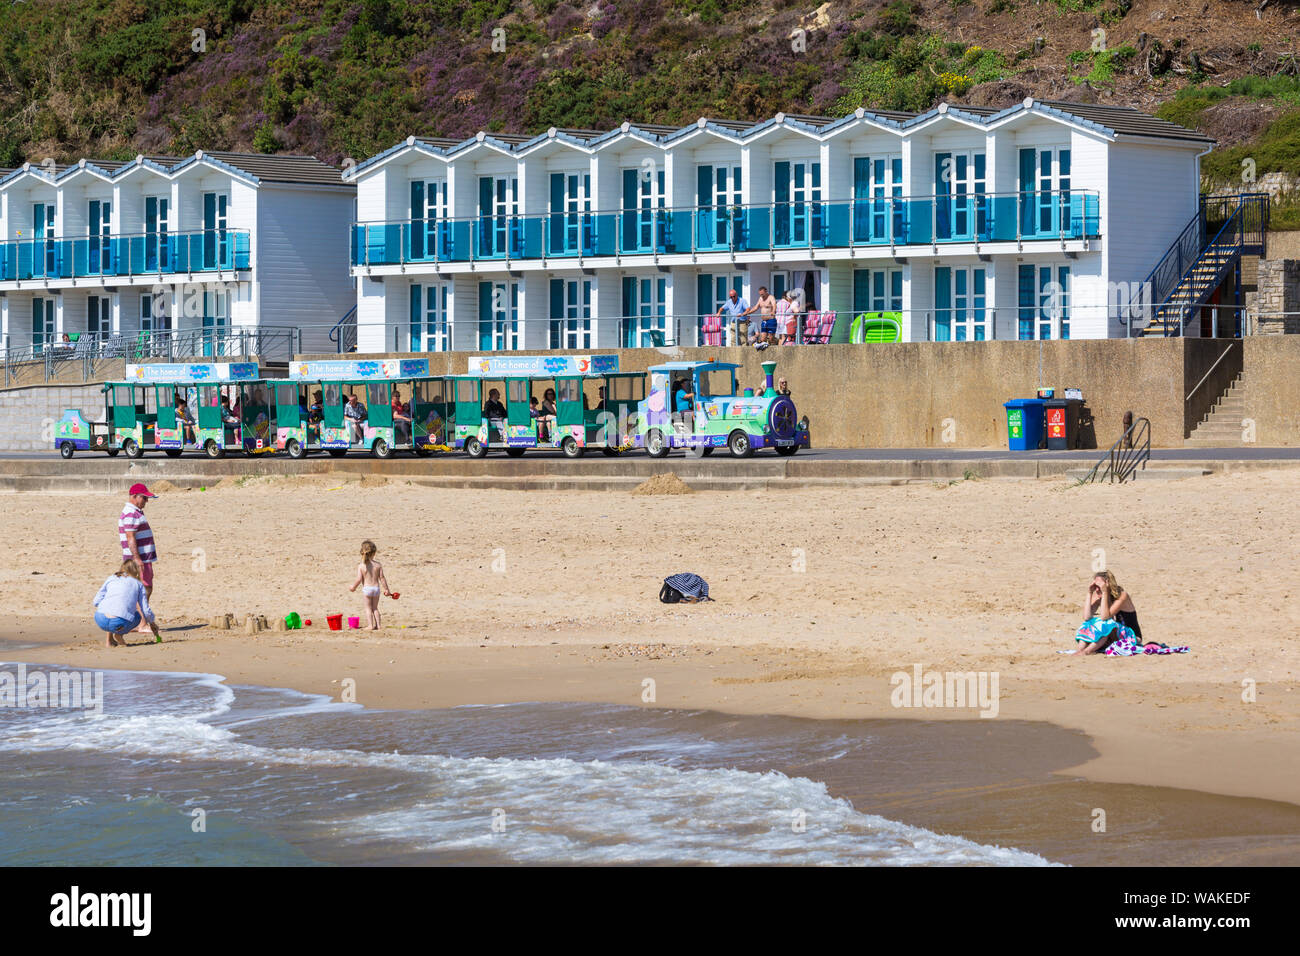 Beach and beach huts at Branksome Chine, Poole, Dorset UK on a warm sunny day in August Stock Photo